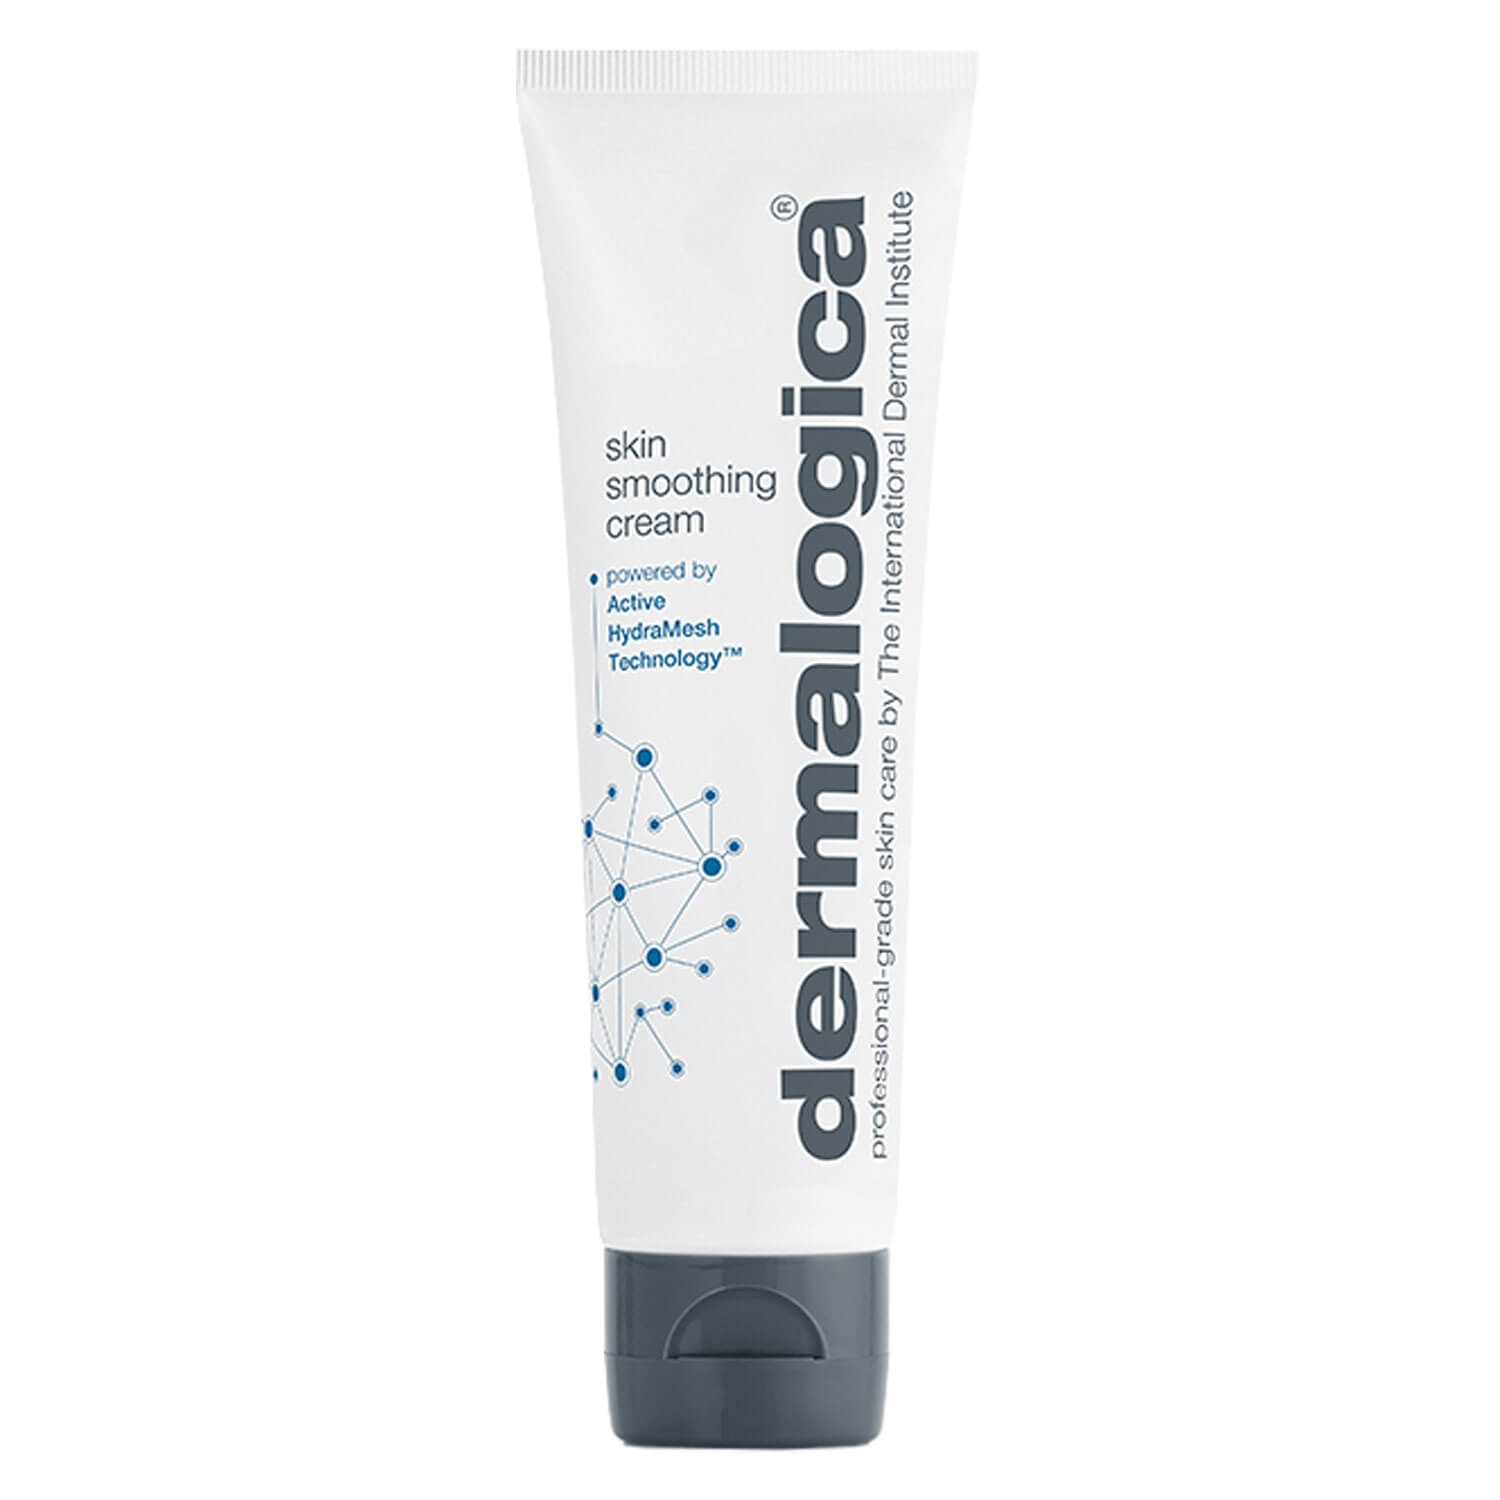 Product image from Moisturizers - Skin Smoothing Cream